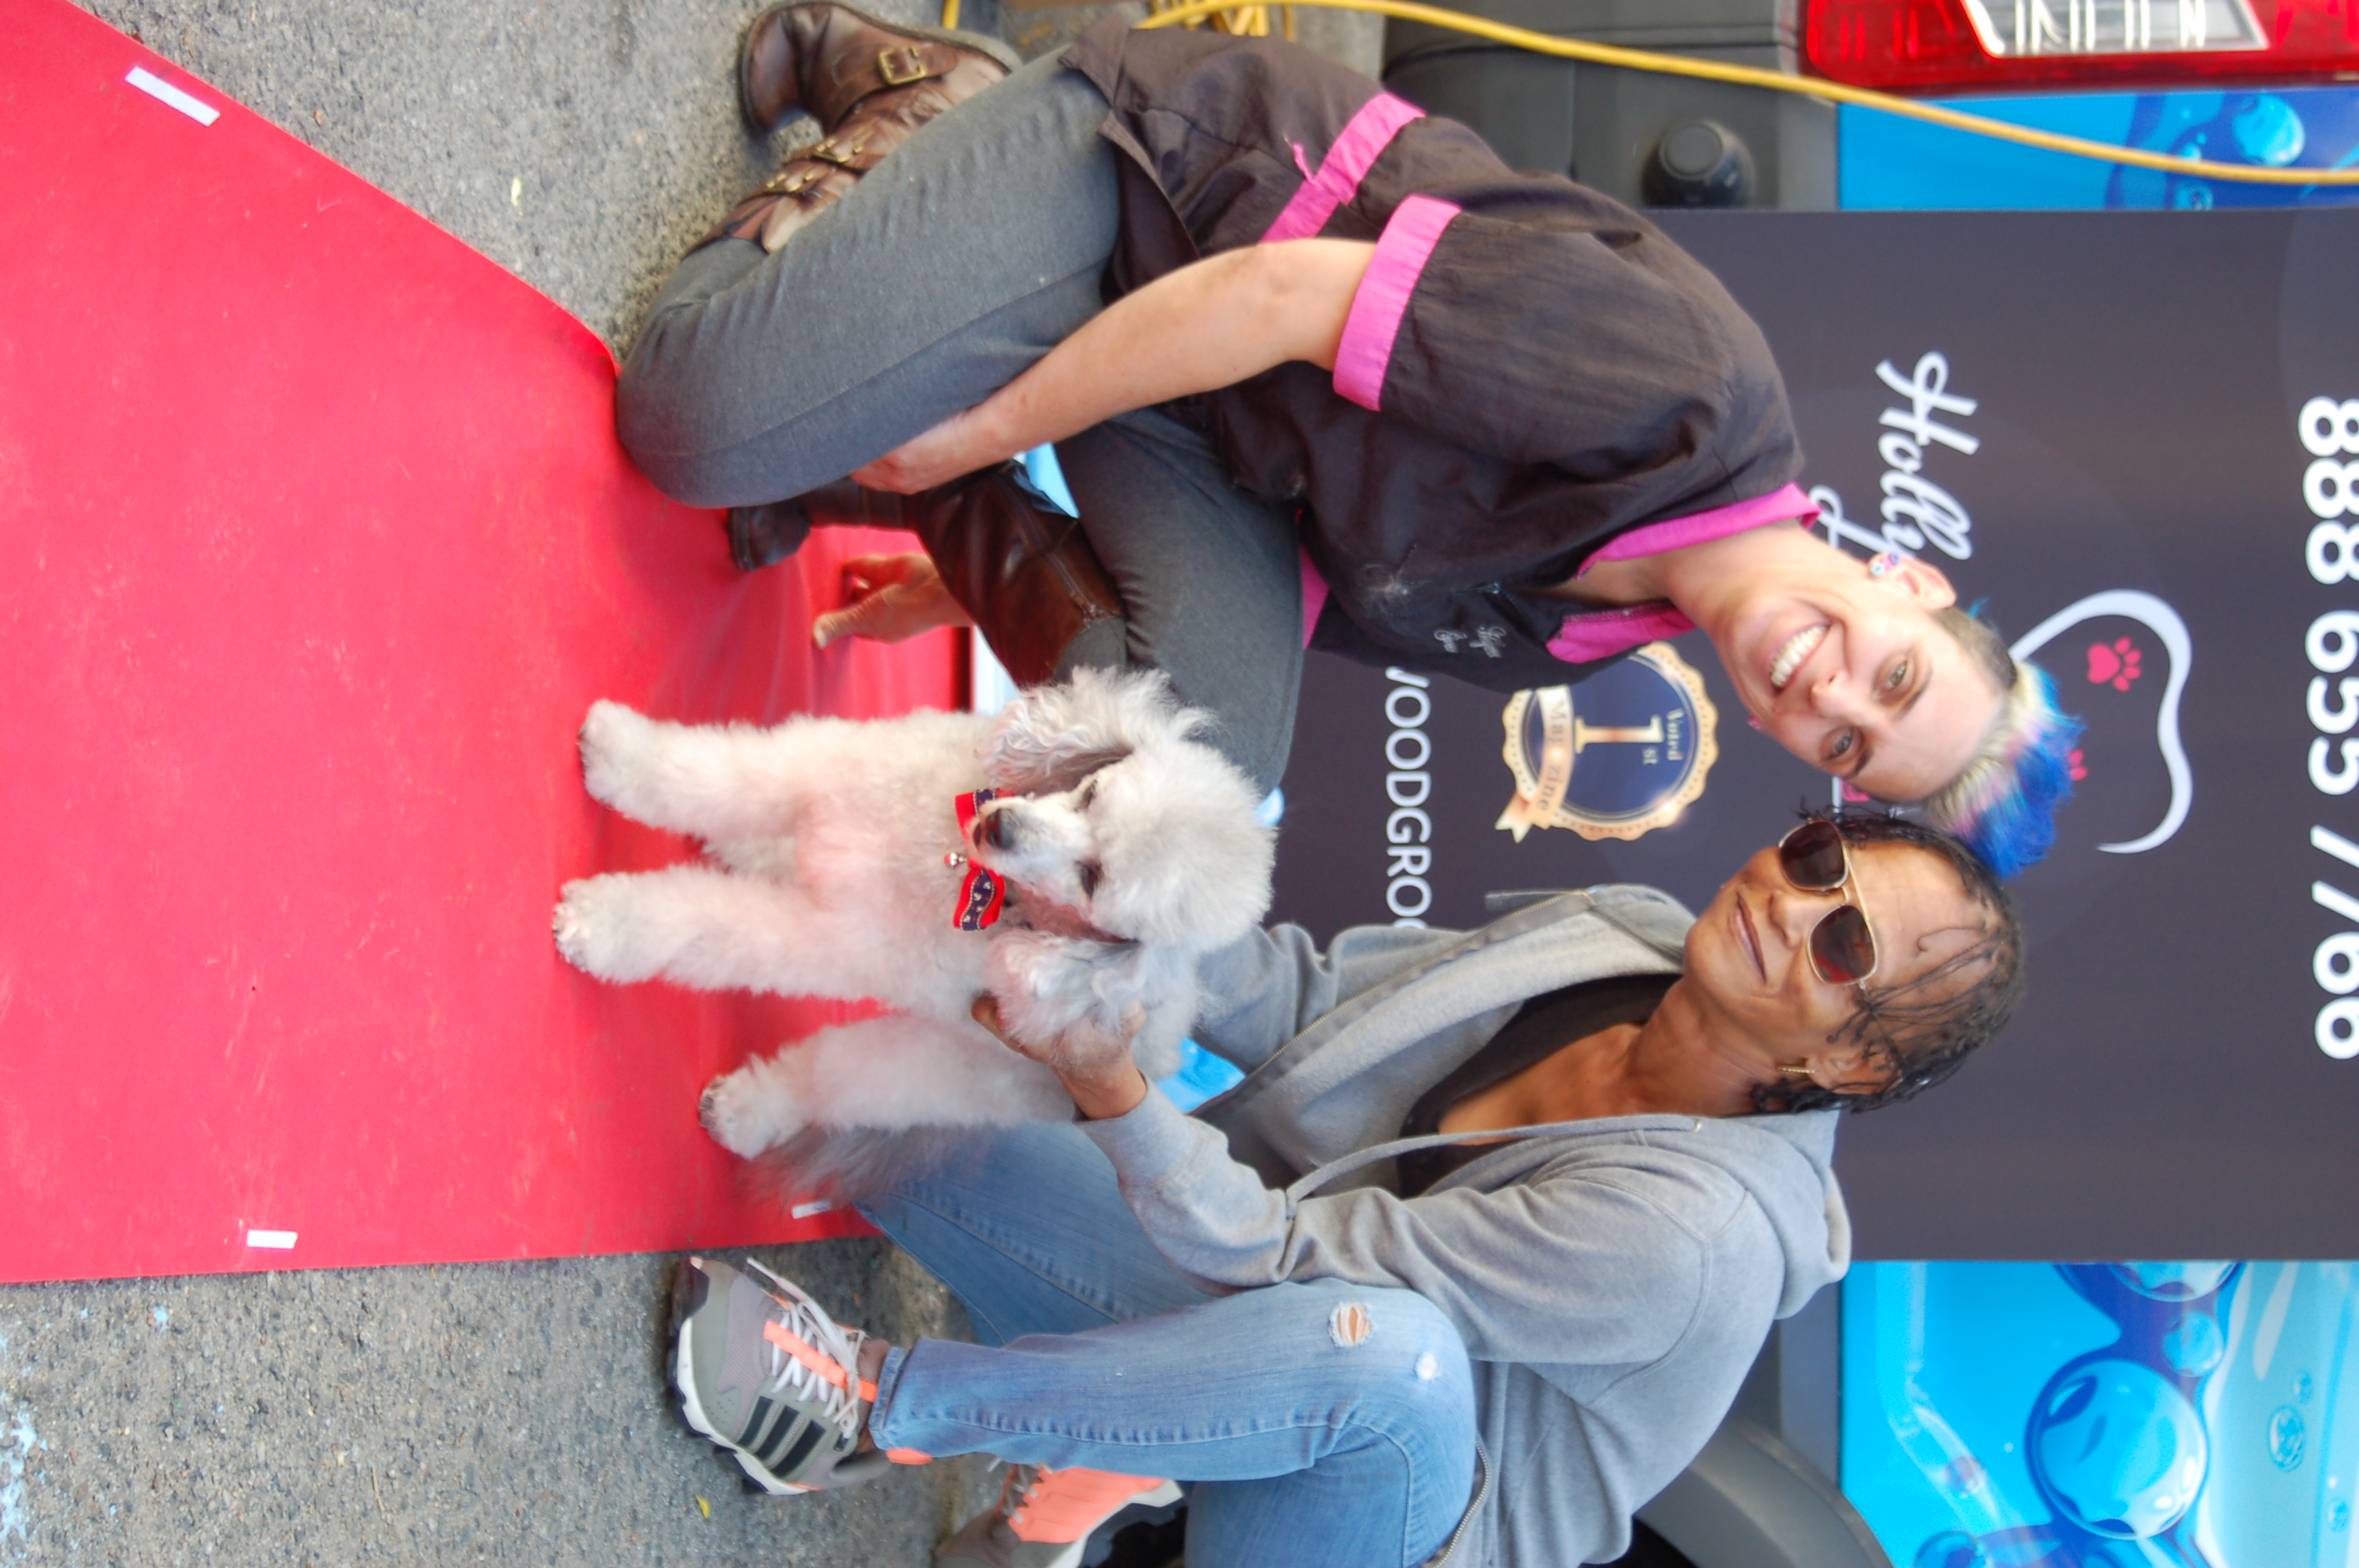 Yael and a pet owner on the red carpet at a Community Event.